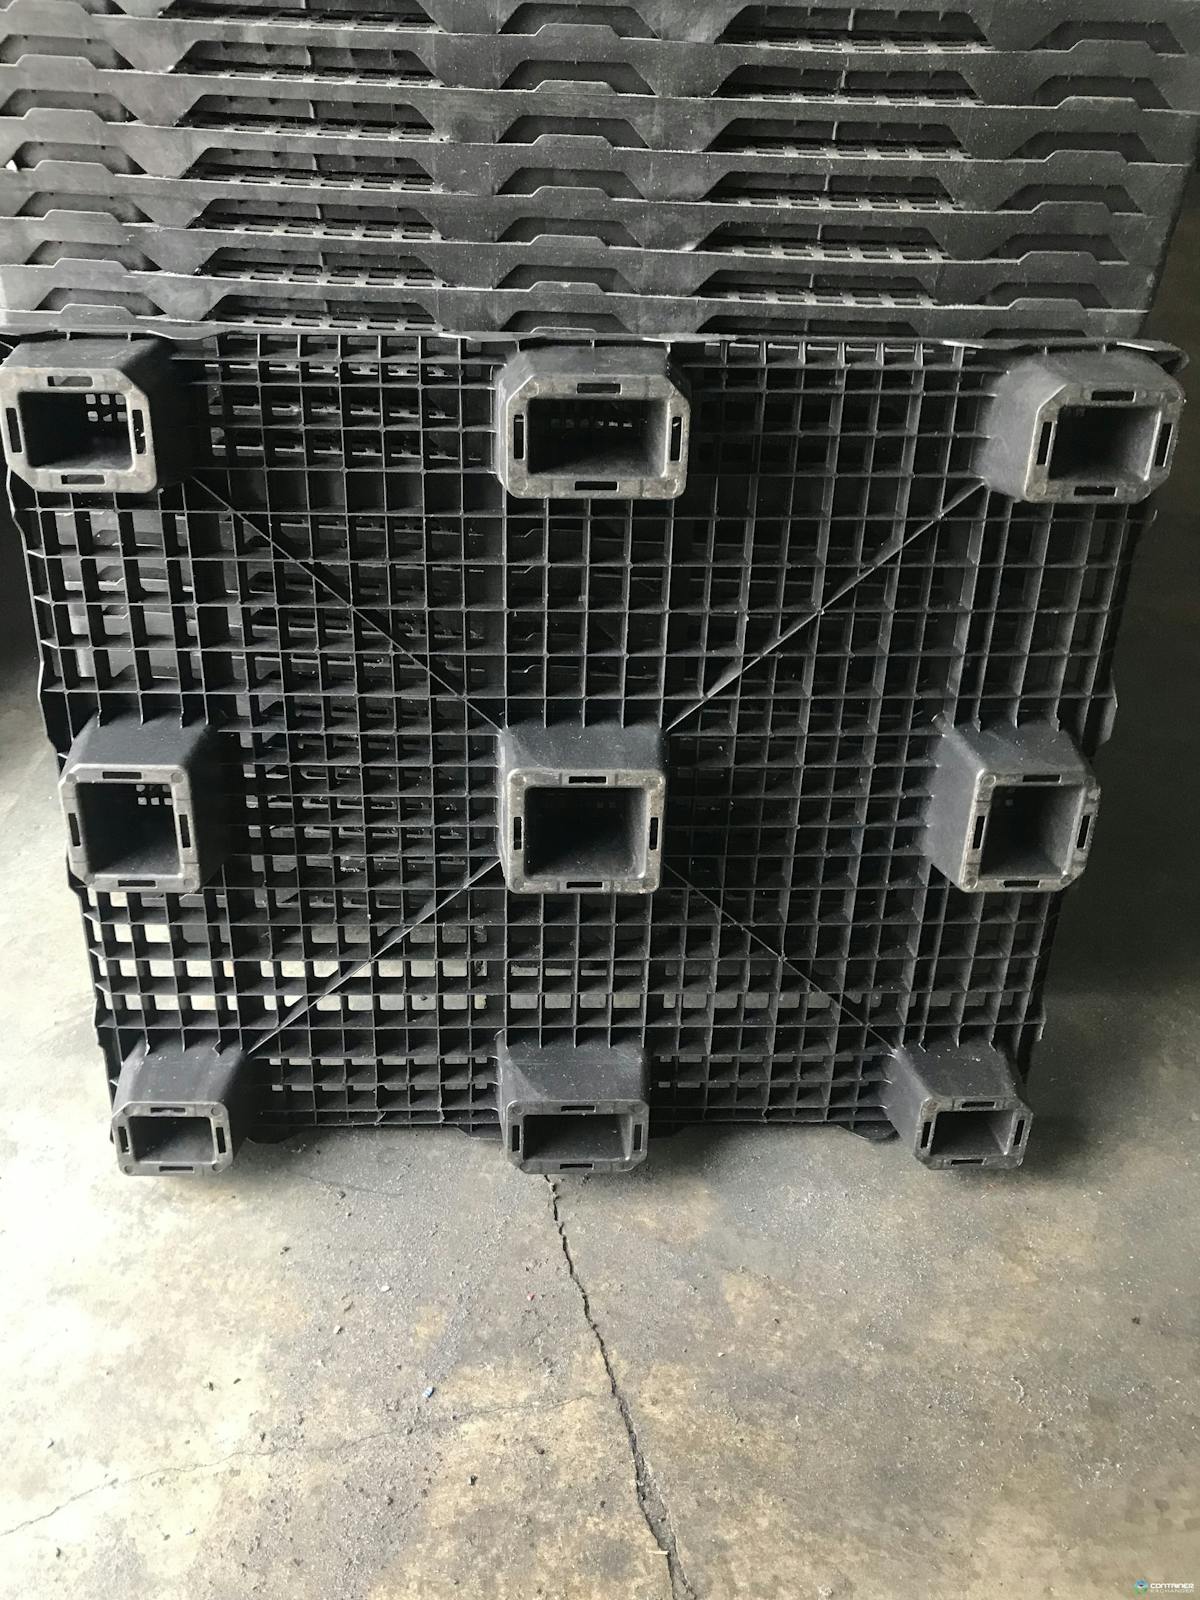 Plastic Pallets For Sale: Used 40x48x5 Food Grade Plastic Pallets In Wisconsin - image 2